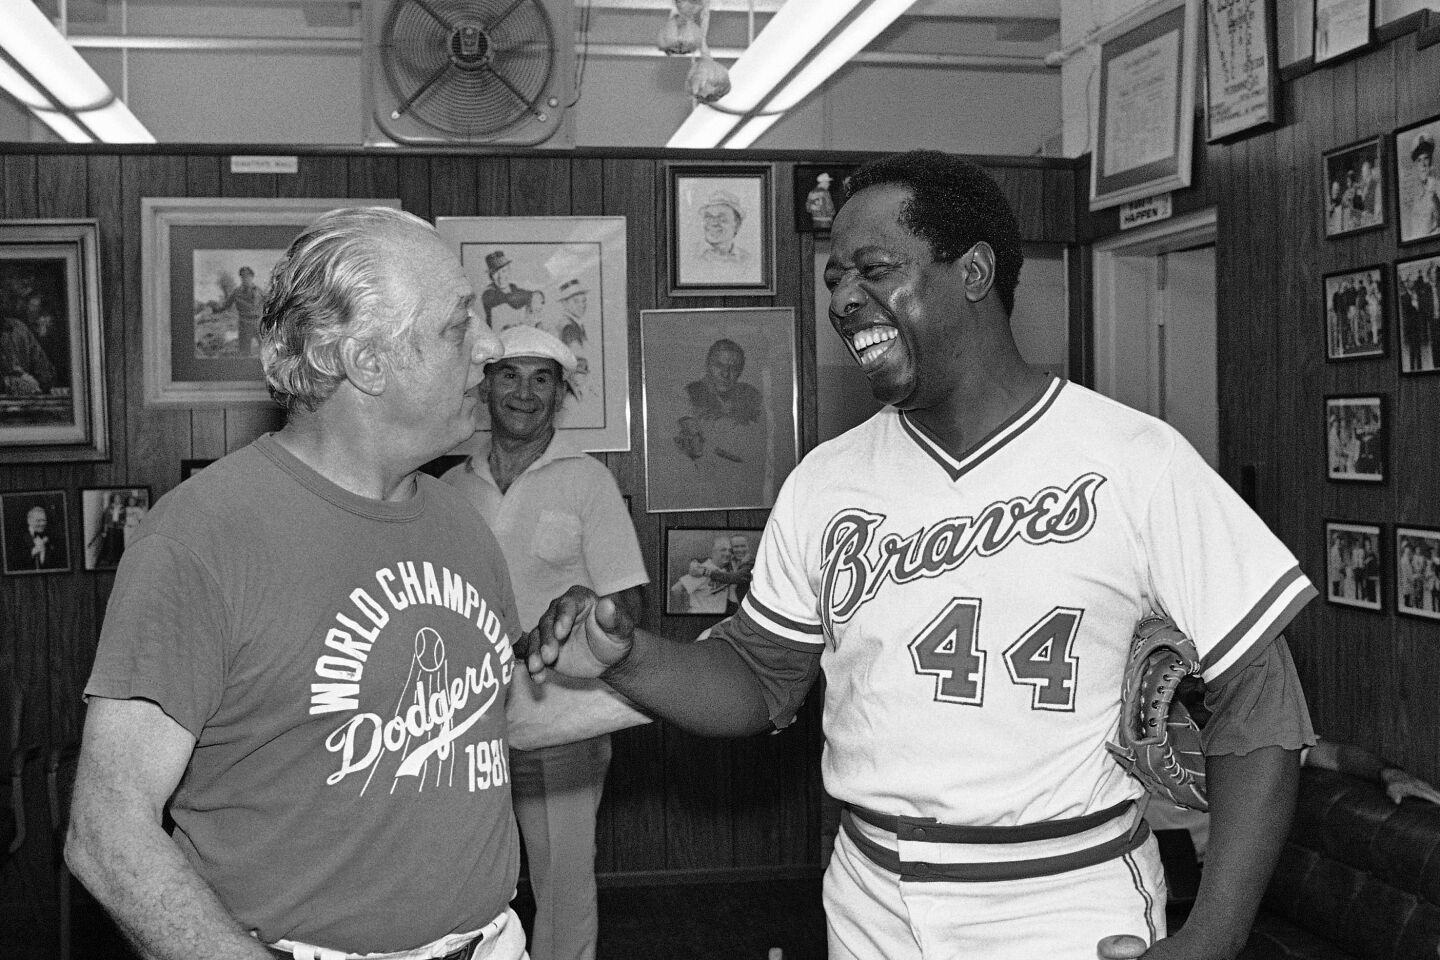 Hank Aaron, right, jokes with Los Angeles Dodgers manager Tommy Lasorda